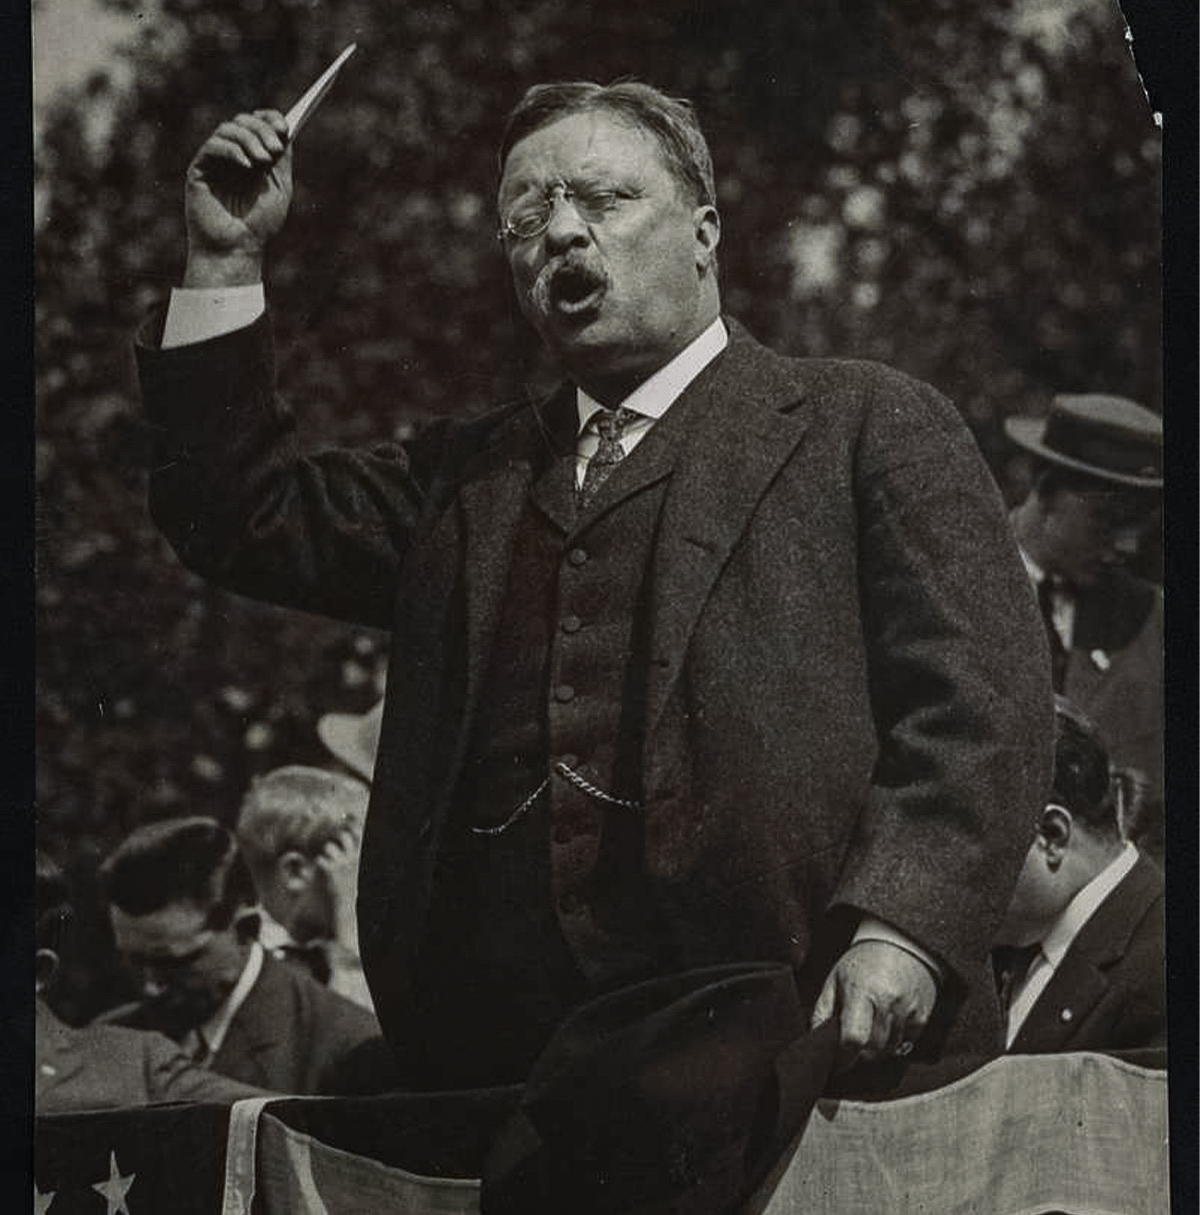 Theodore Roosevelt delivered a lengthy campaign speech immediately after being shot in the chest.